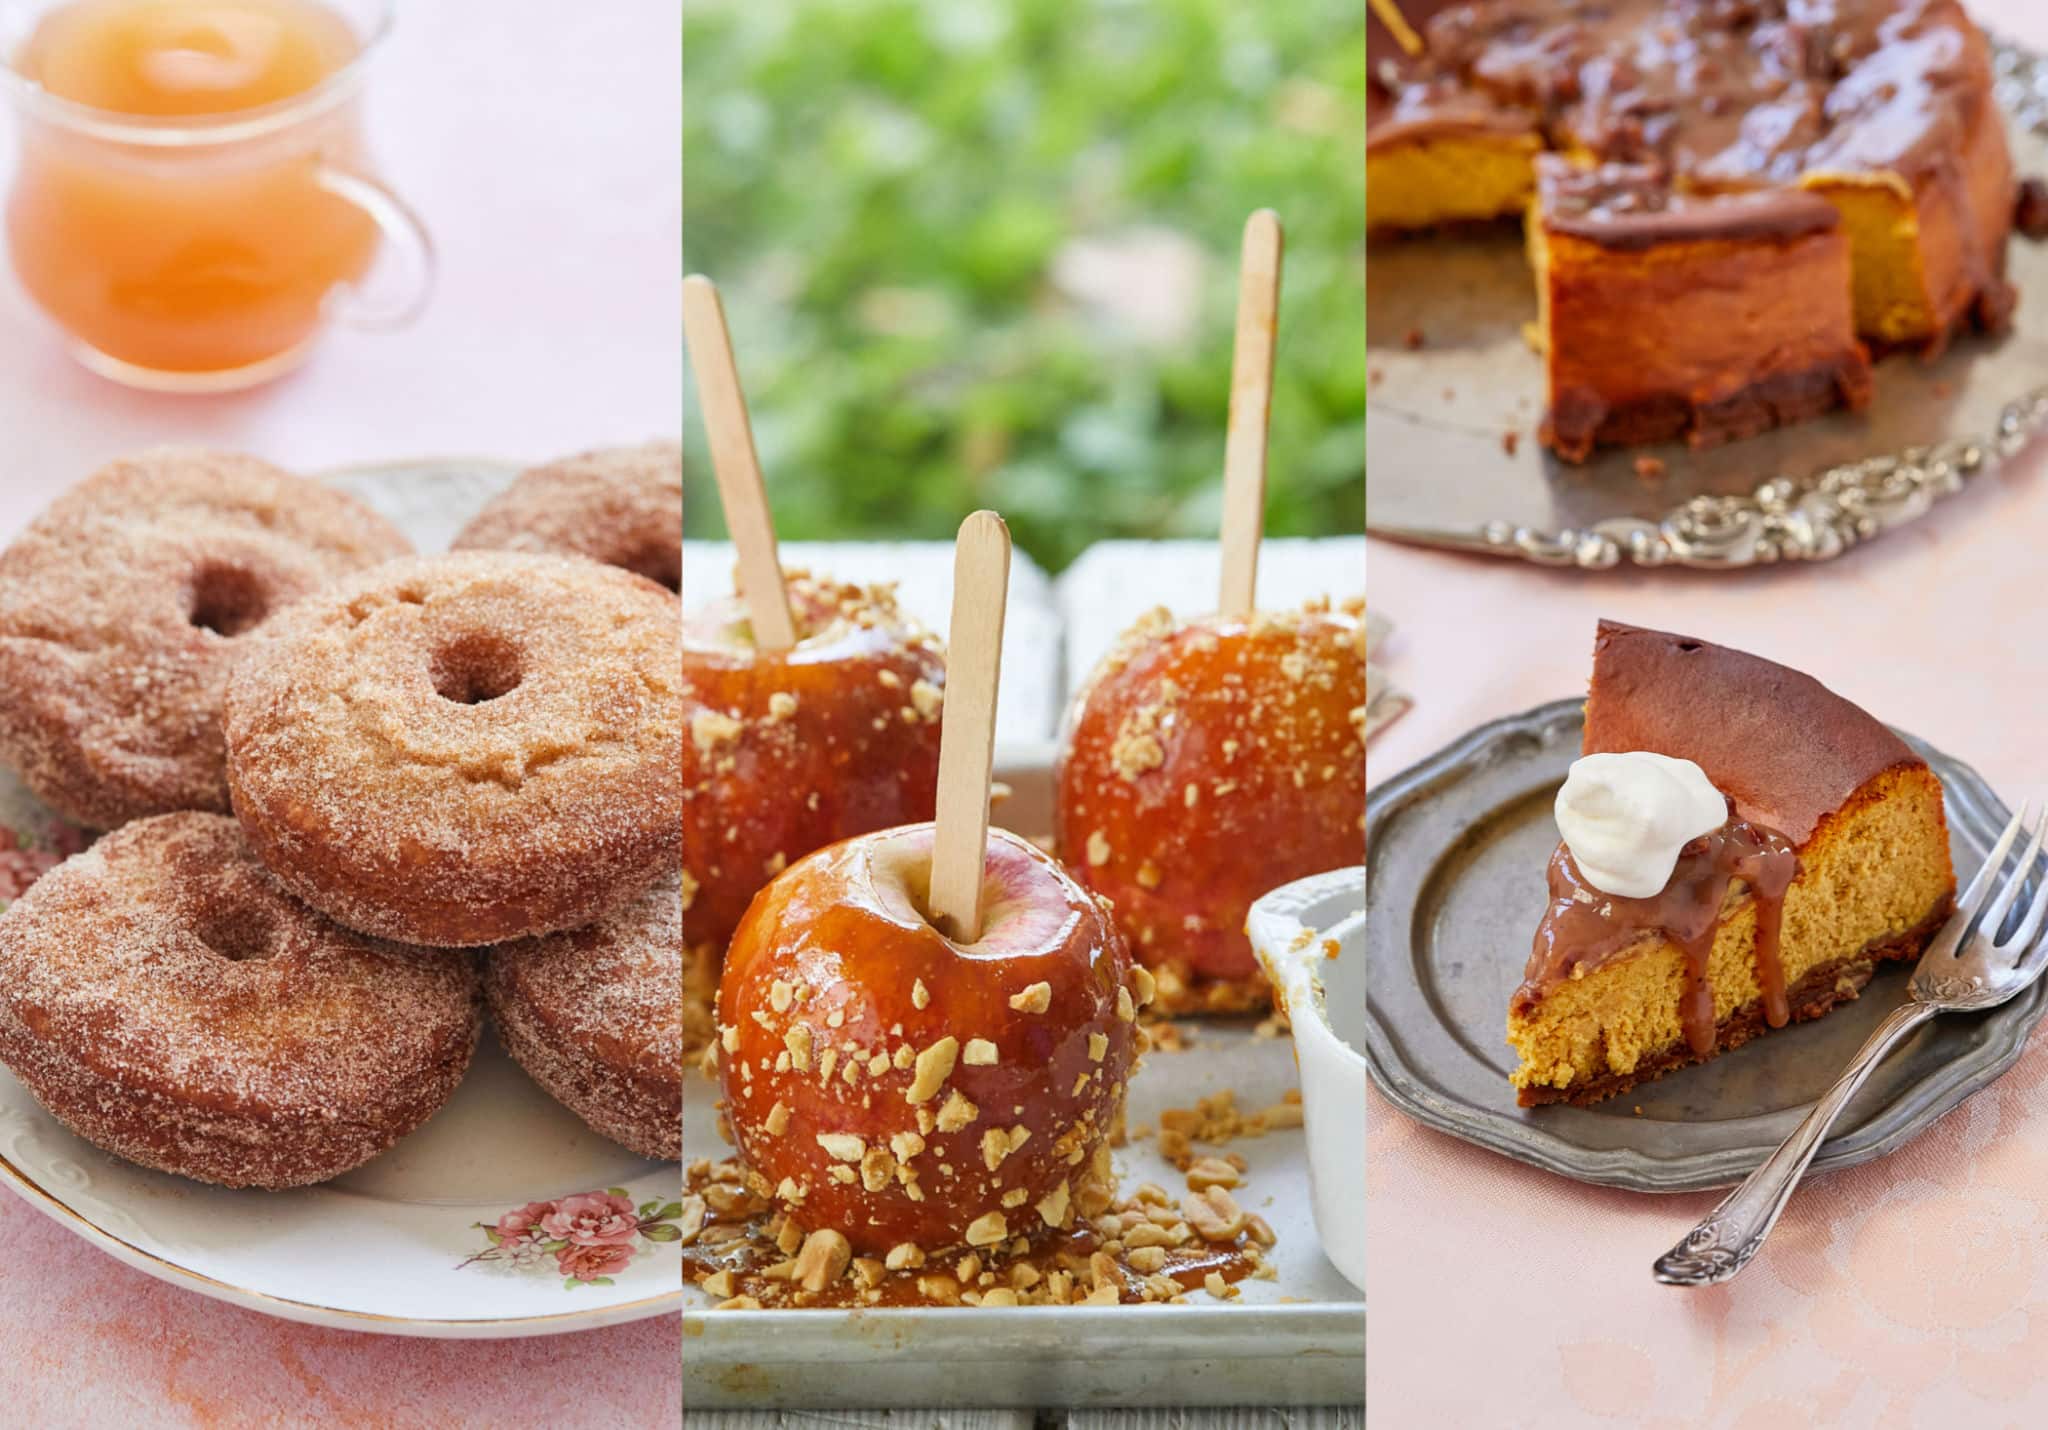 Three images are situated side by side. On the left are homemade apple cider cake donuts. In the middle are homemade caramel apples on a stick with nuts. On the right is pumpkin cheesecake with pecan praline sauce.